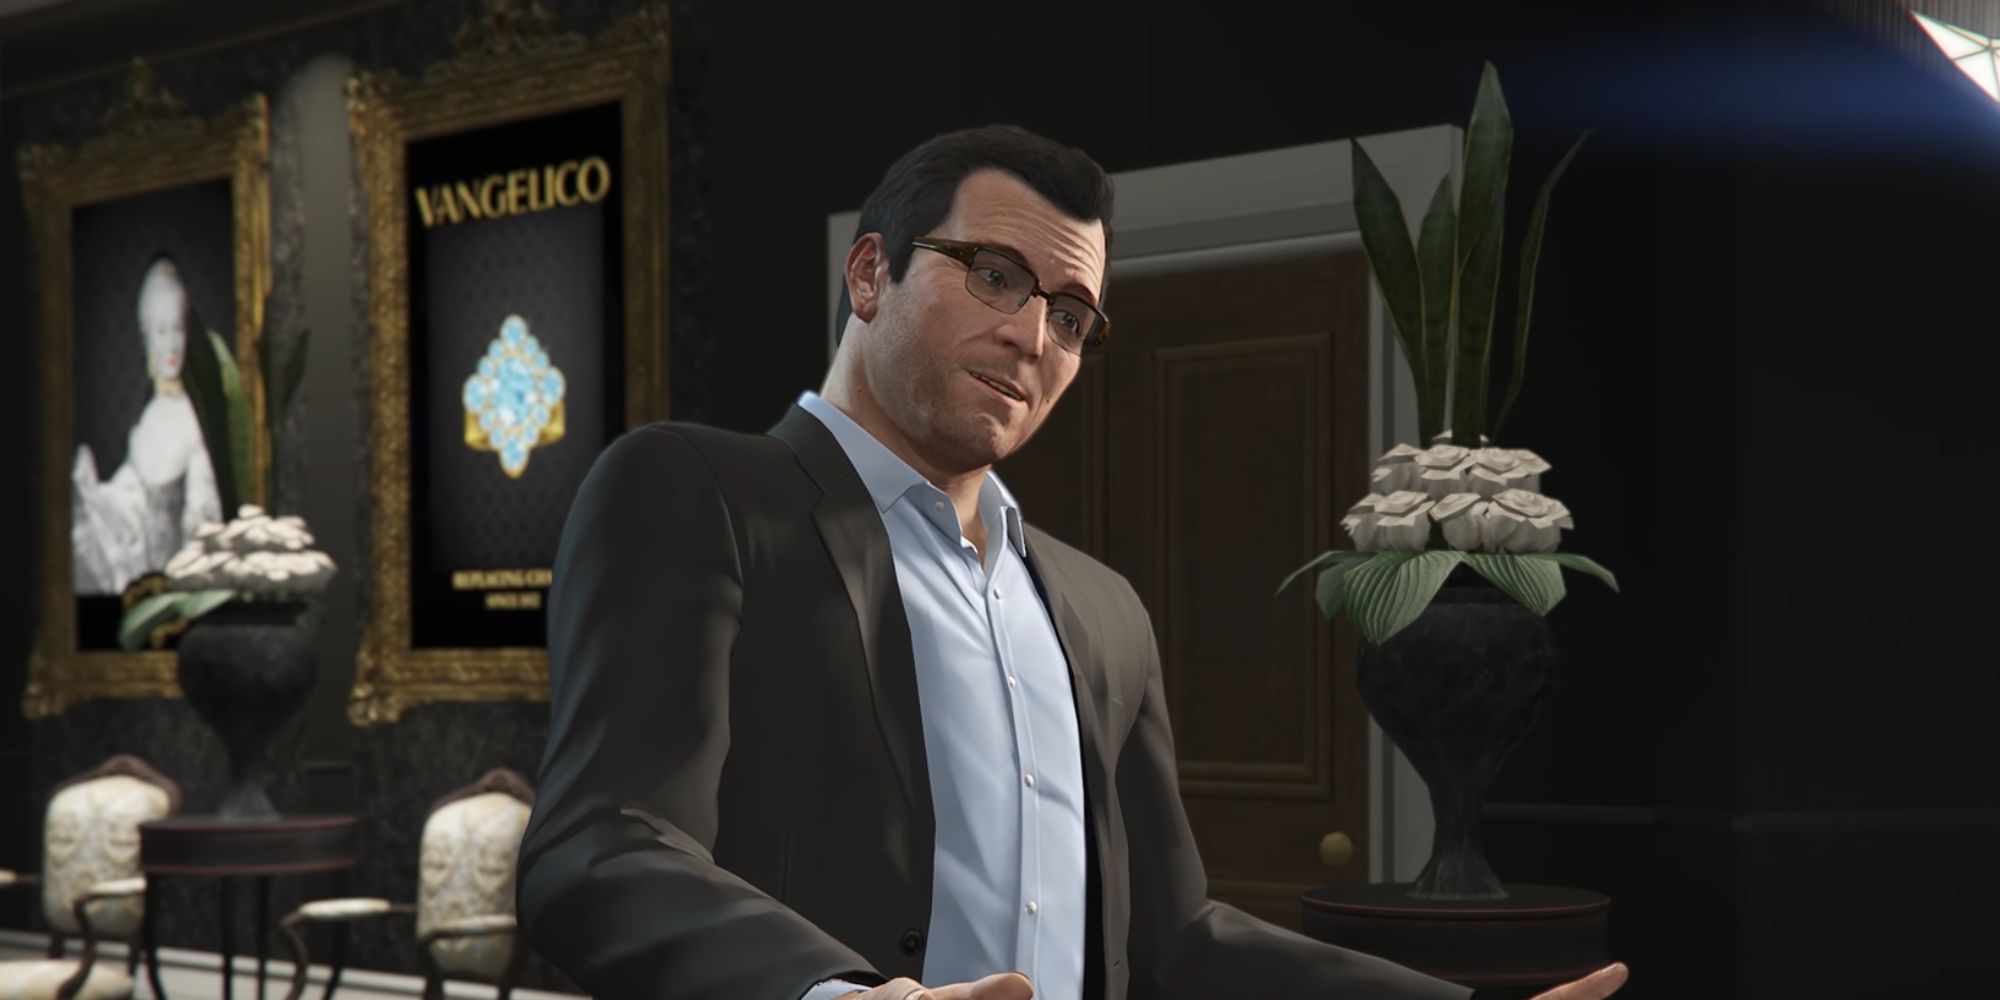 Grand Theft Auto 5 Screenshot Of Michael Wearing Glasses While Casing Jewellery Store